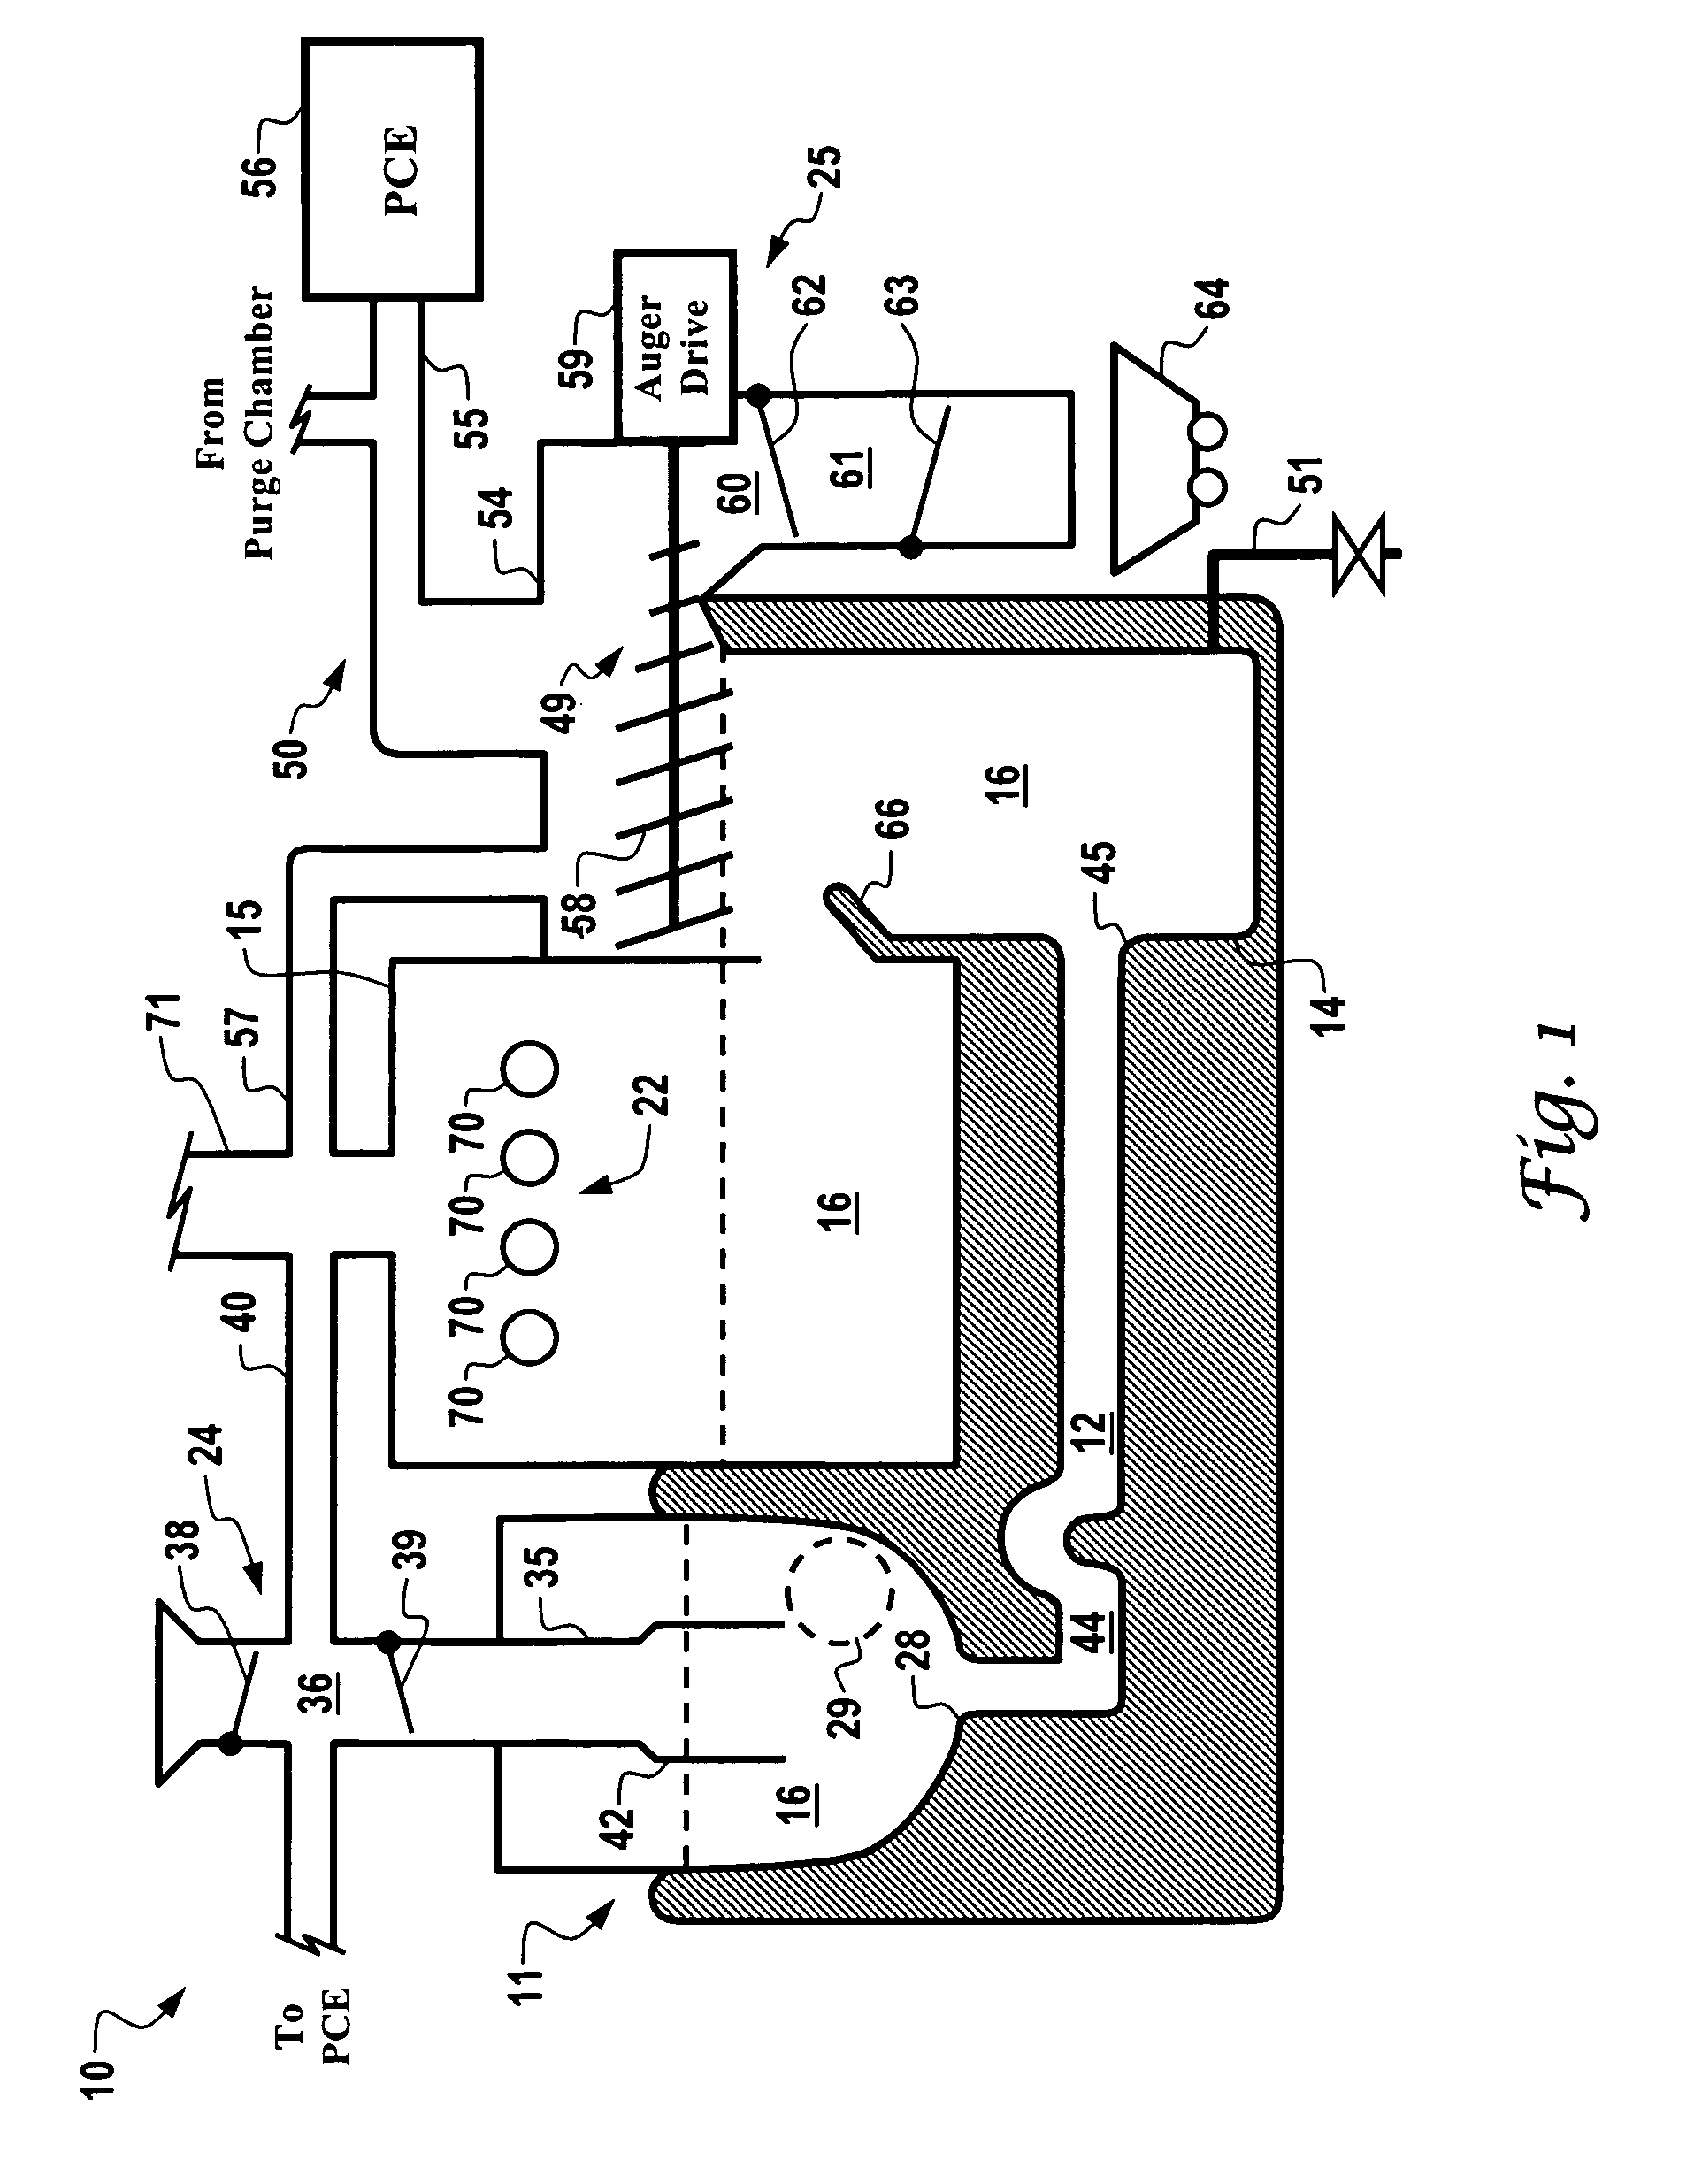 Molten metal reactor utilizing molten metal flow for feed material and reaction product entrapment